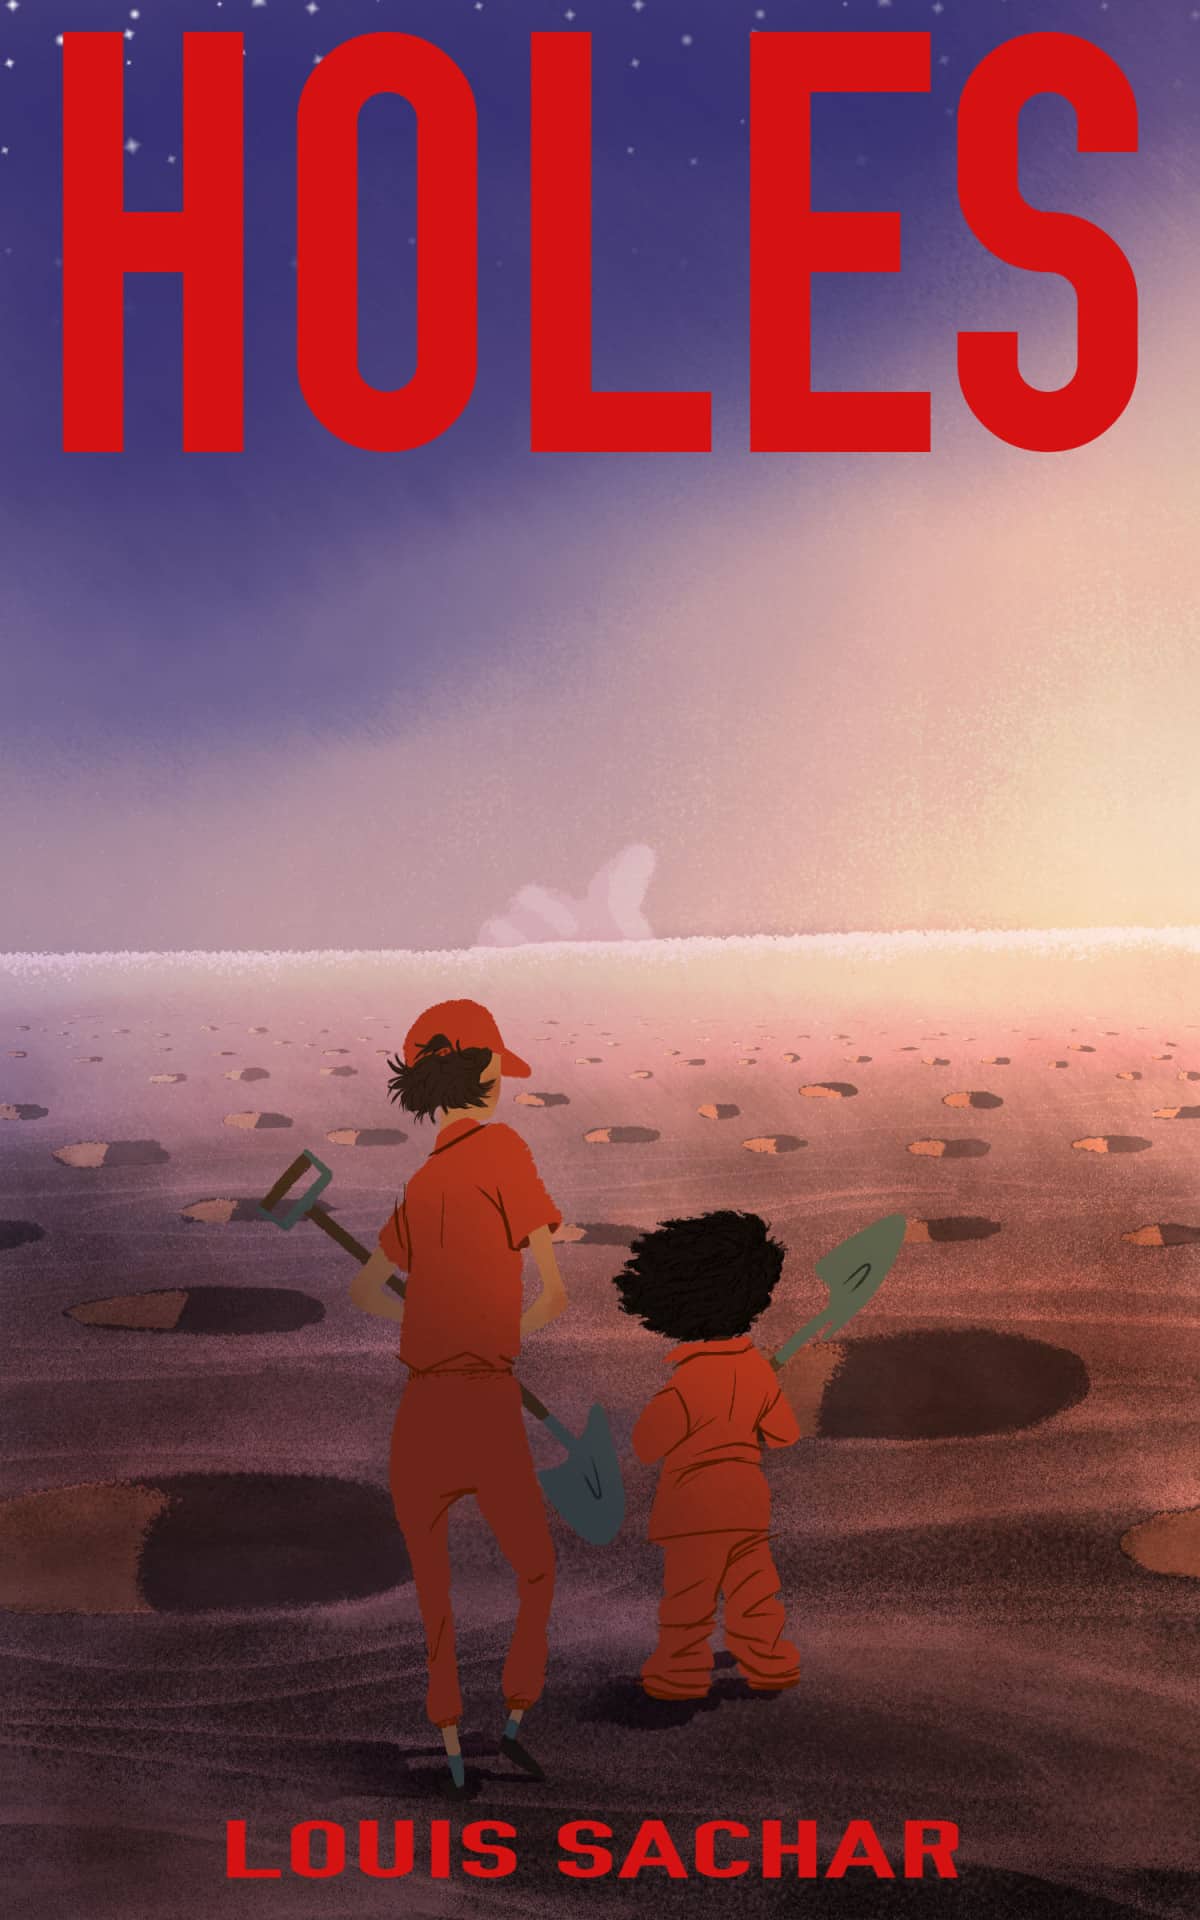 The cover for the book Holes